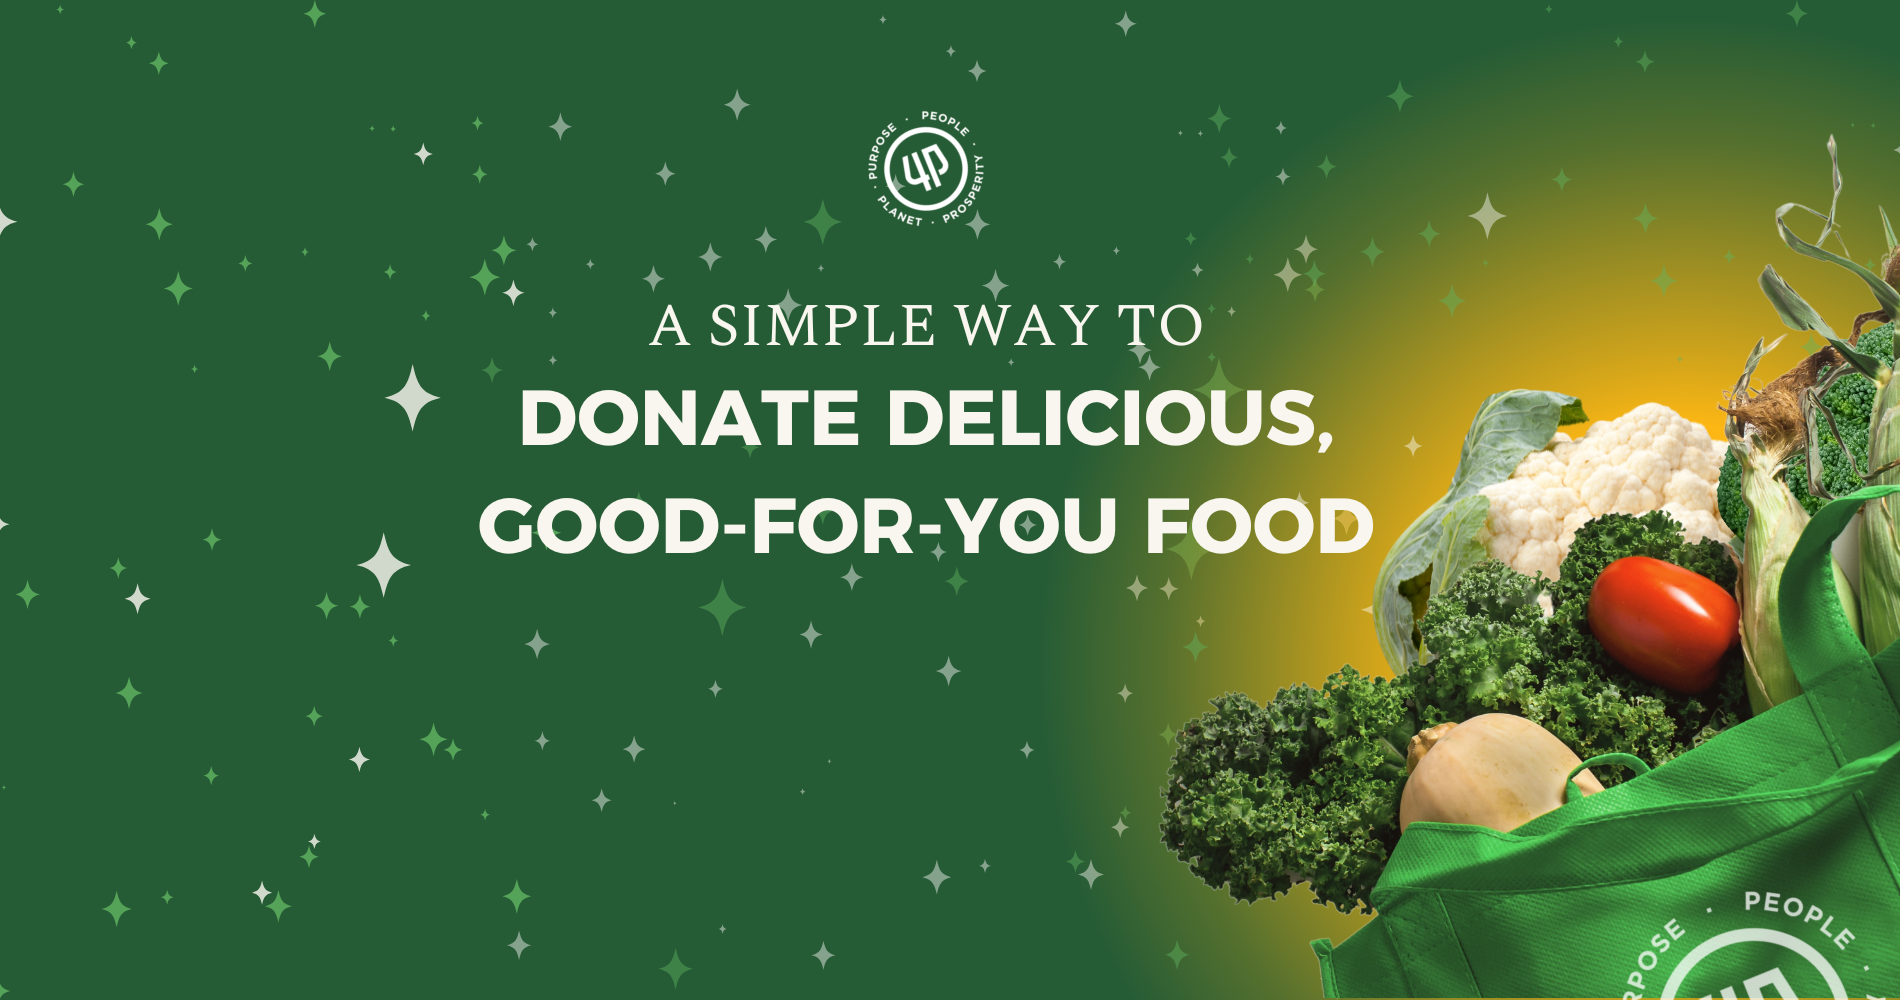 A Simple Way To Donate Delicious, Good-For-You Food image